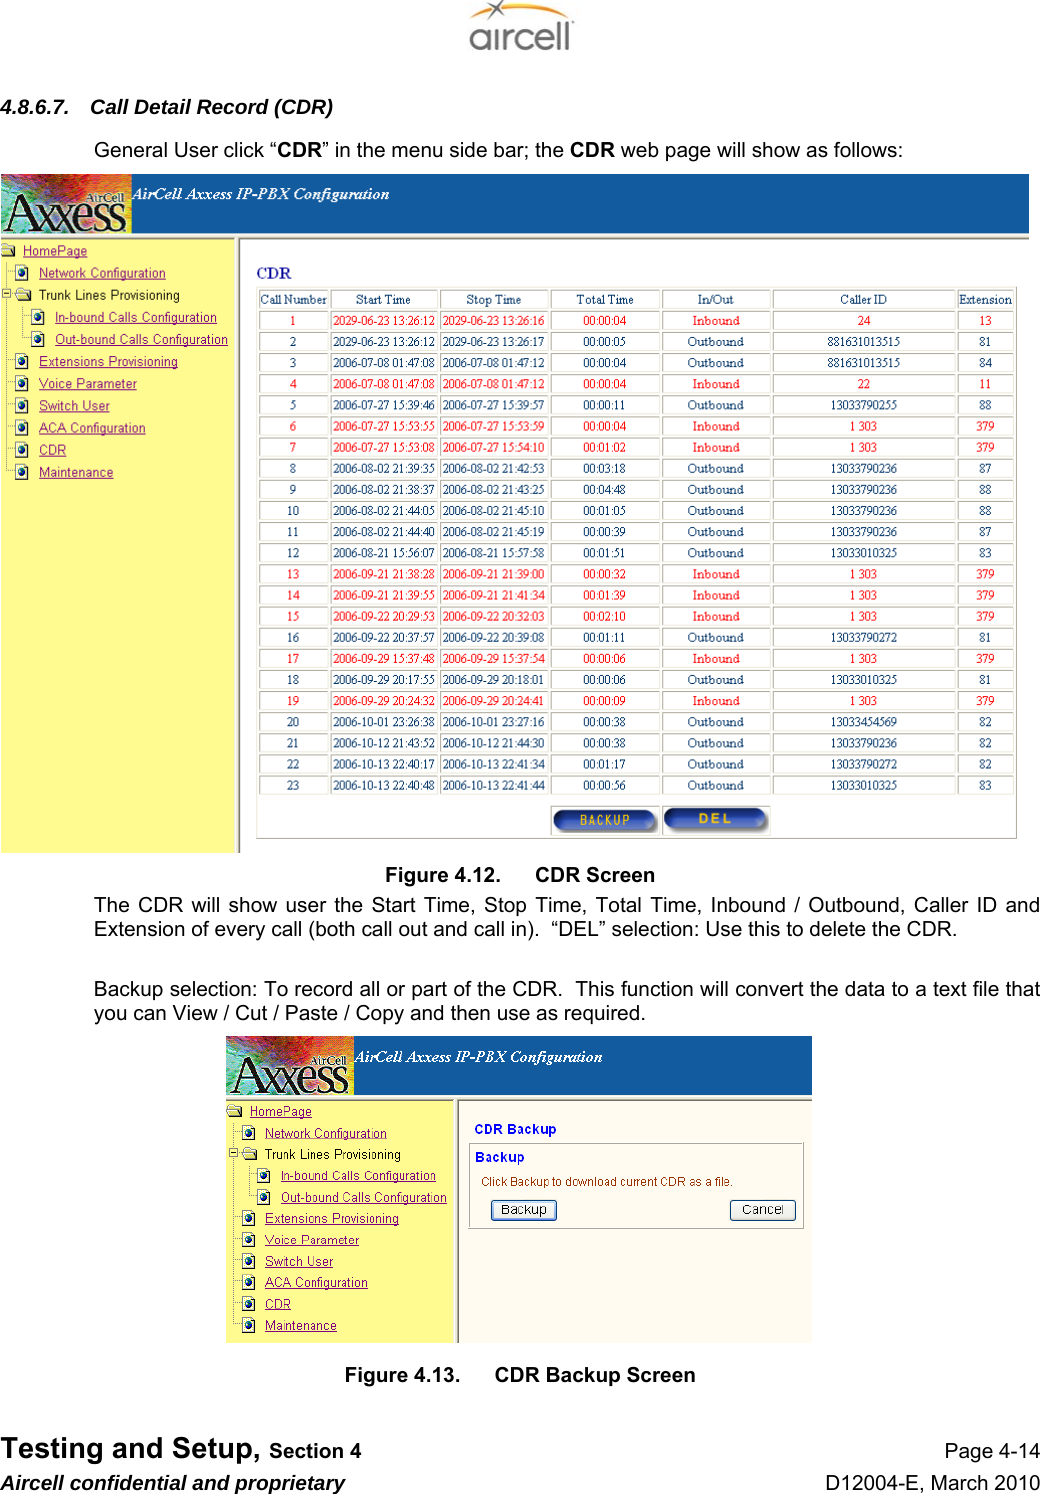  Testing and Setup, Section 4 Page 4-14 Aircell confidential and proprietary D12004-E, March 2010 4.8.6.7.  Call Detail Record (CDR) General User click “CDR” in the menu side bar; the CDR web page will show as follows: Figure 4.12.  CDR Screen The CDR will show user the Start Time, Stop Time, Total Time, Inbound / Outbound, Caller ID and Extension of every call (both call out and call in).  “DEL” selection: Use this to delete the CDR.  Backup selection: To record all or part of the CDR.  This function will convert the data to a text file that you can View / Cut / Paste / Copy and then use as required.             Figure 4.13.  CDR Backup Screen 